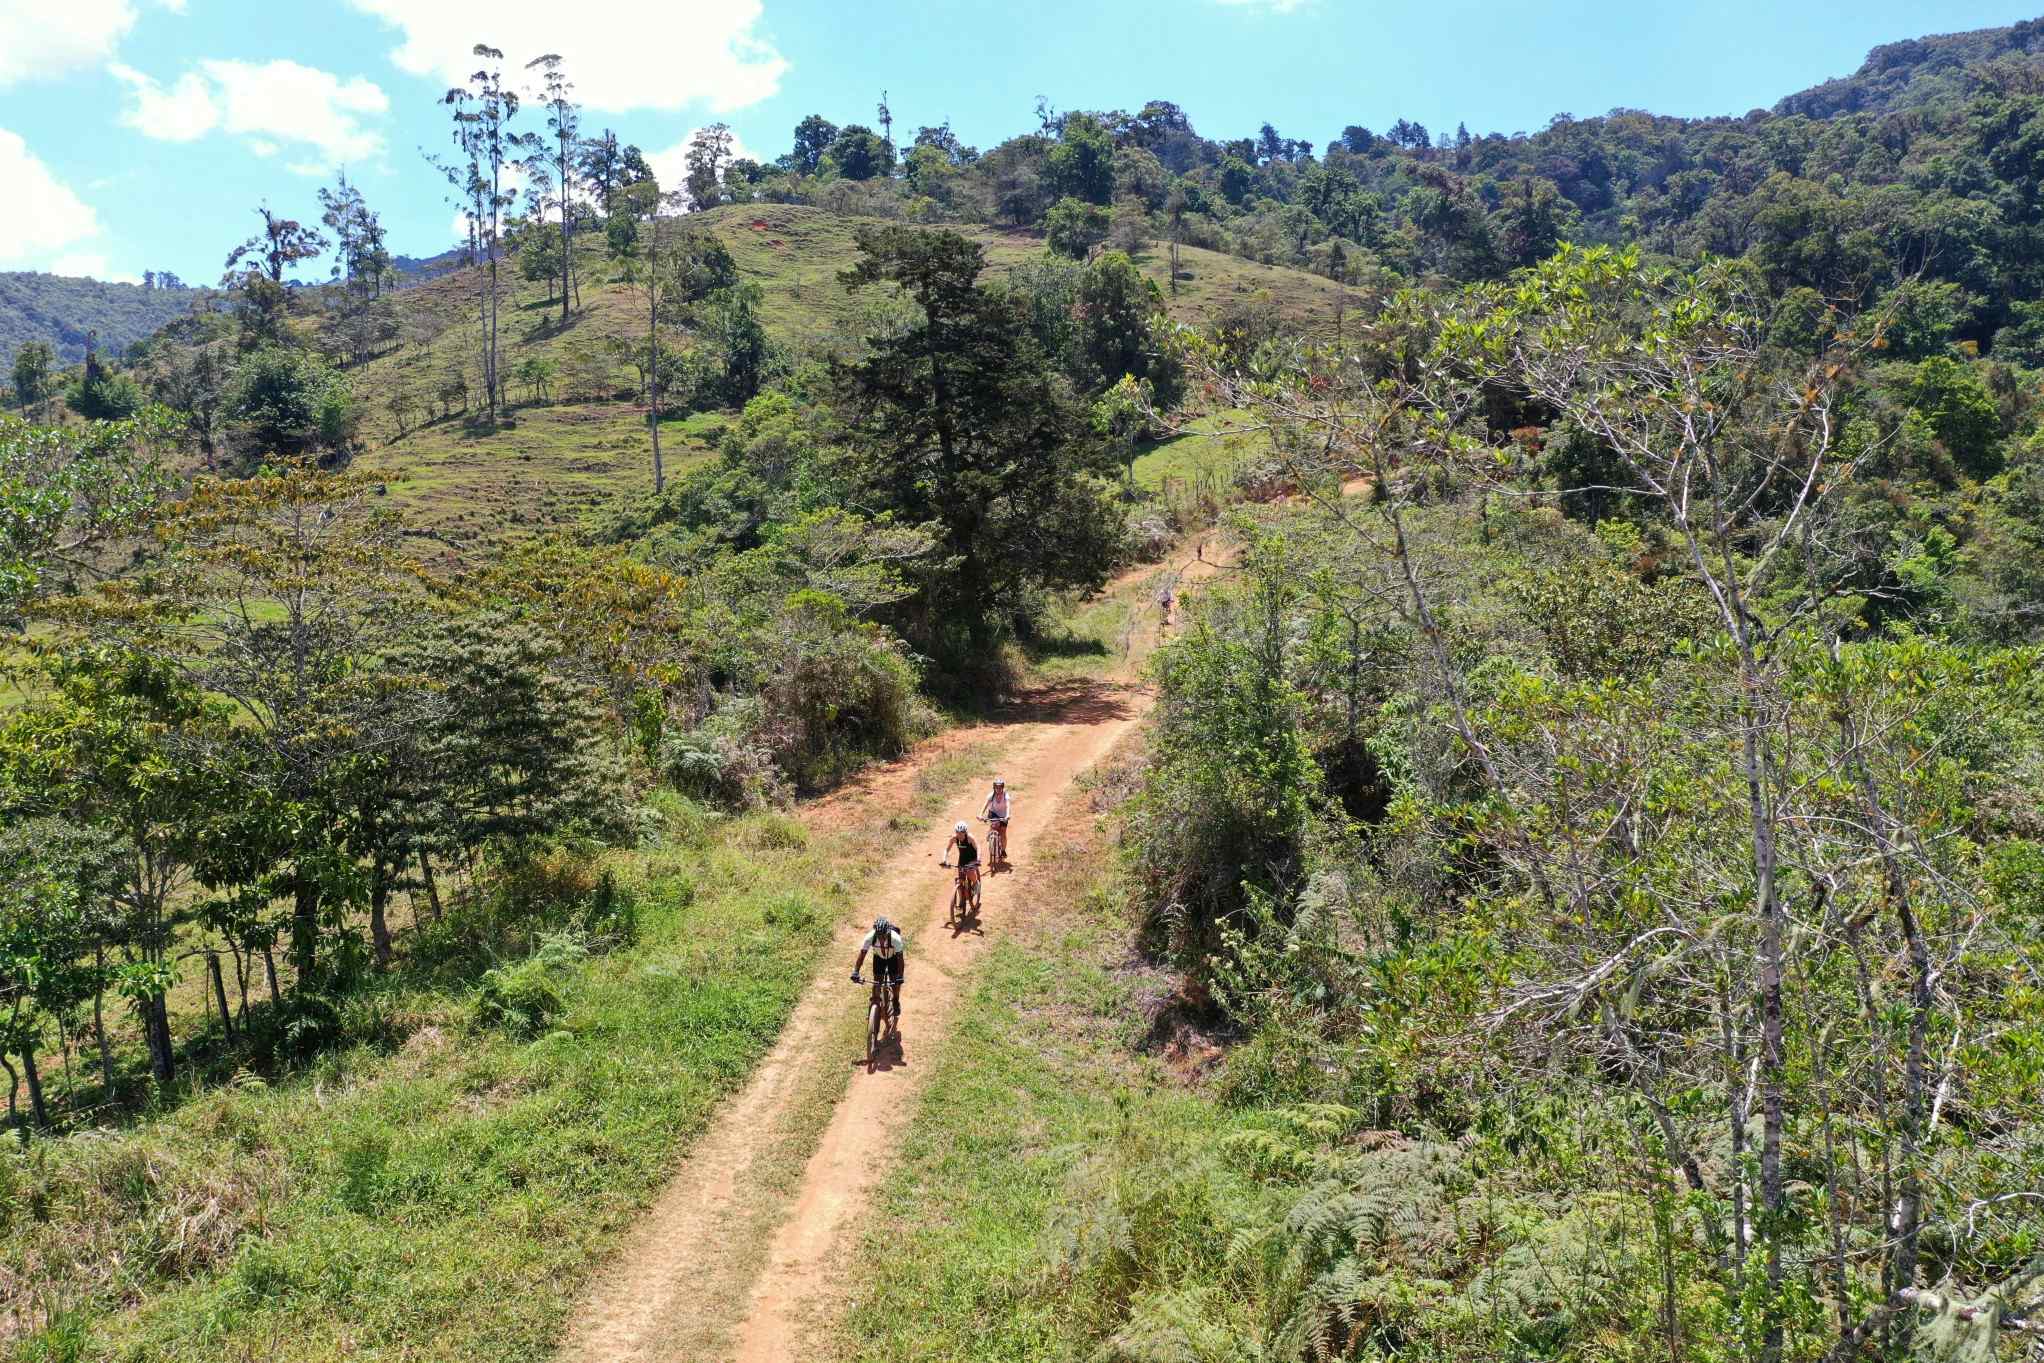 Cyclists pedalling along a track in Costa Rica